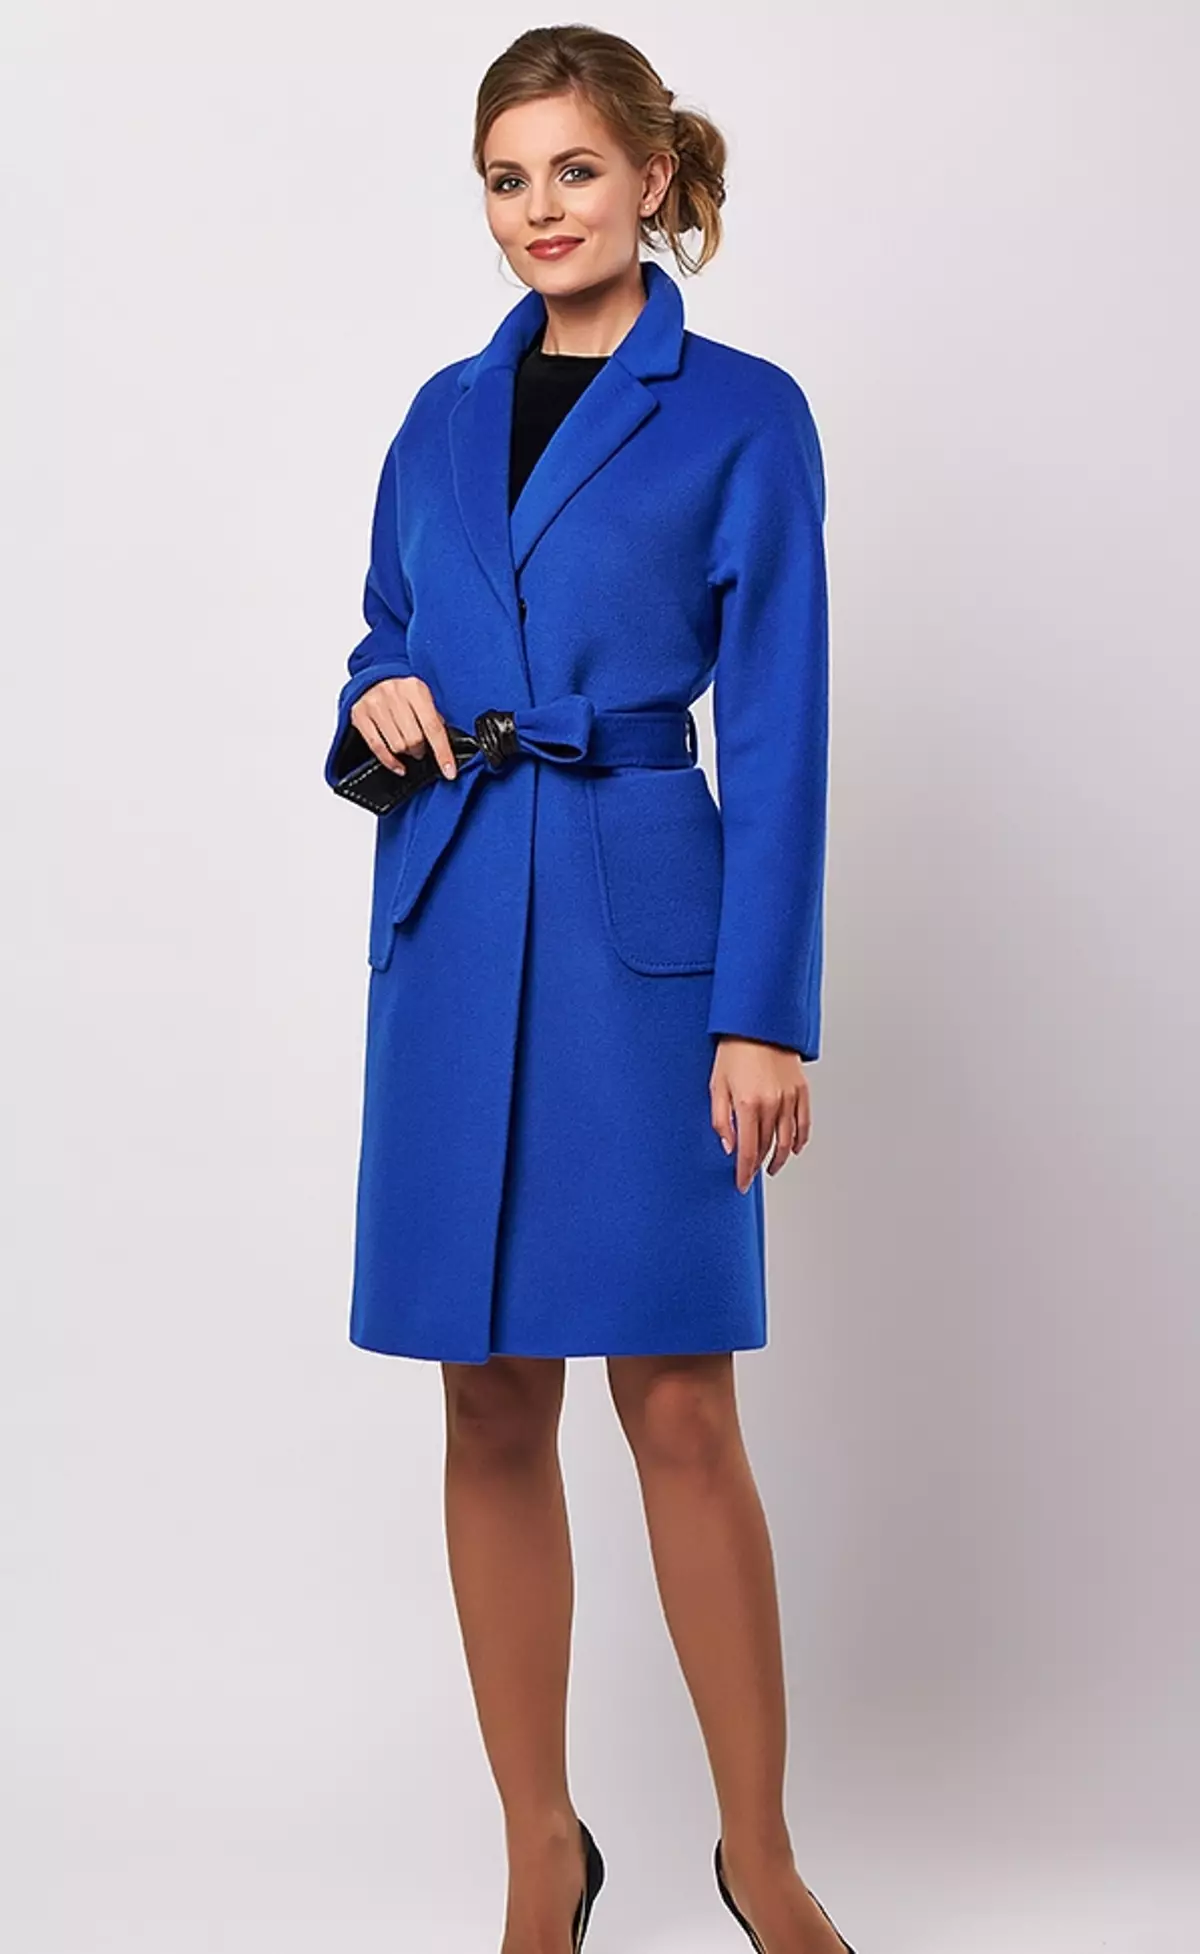 Personne Coat (30 larawan): Female luxury models from person 351_14